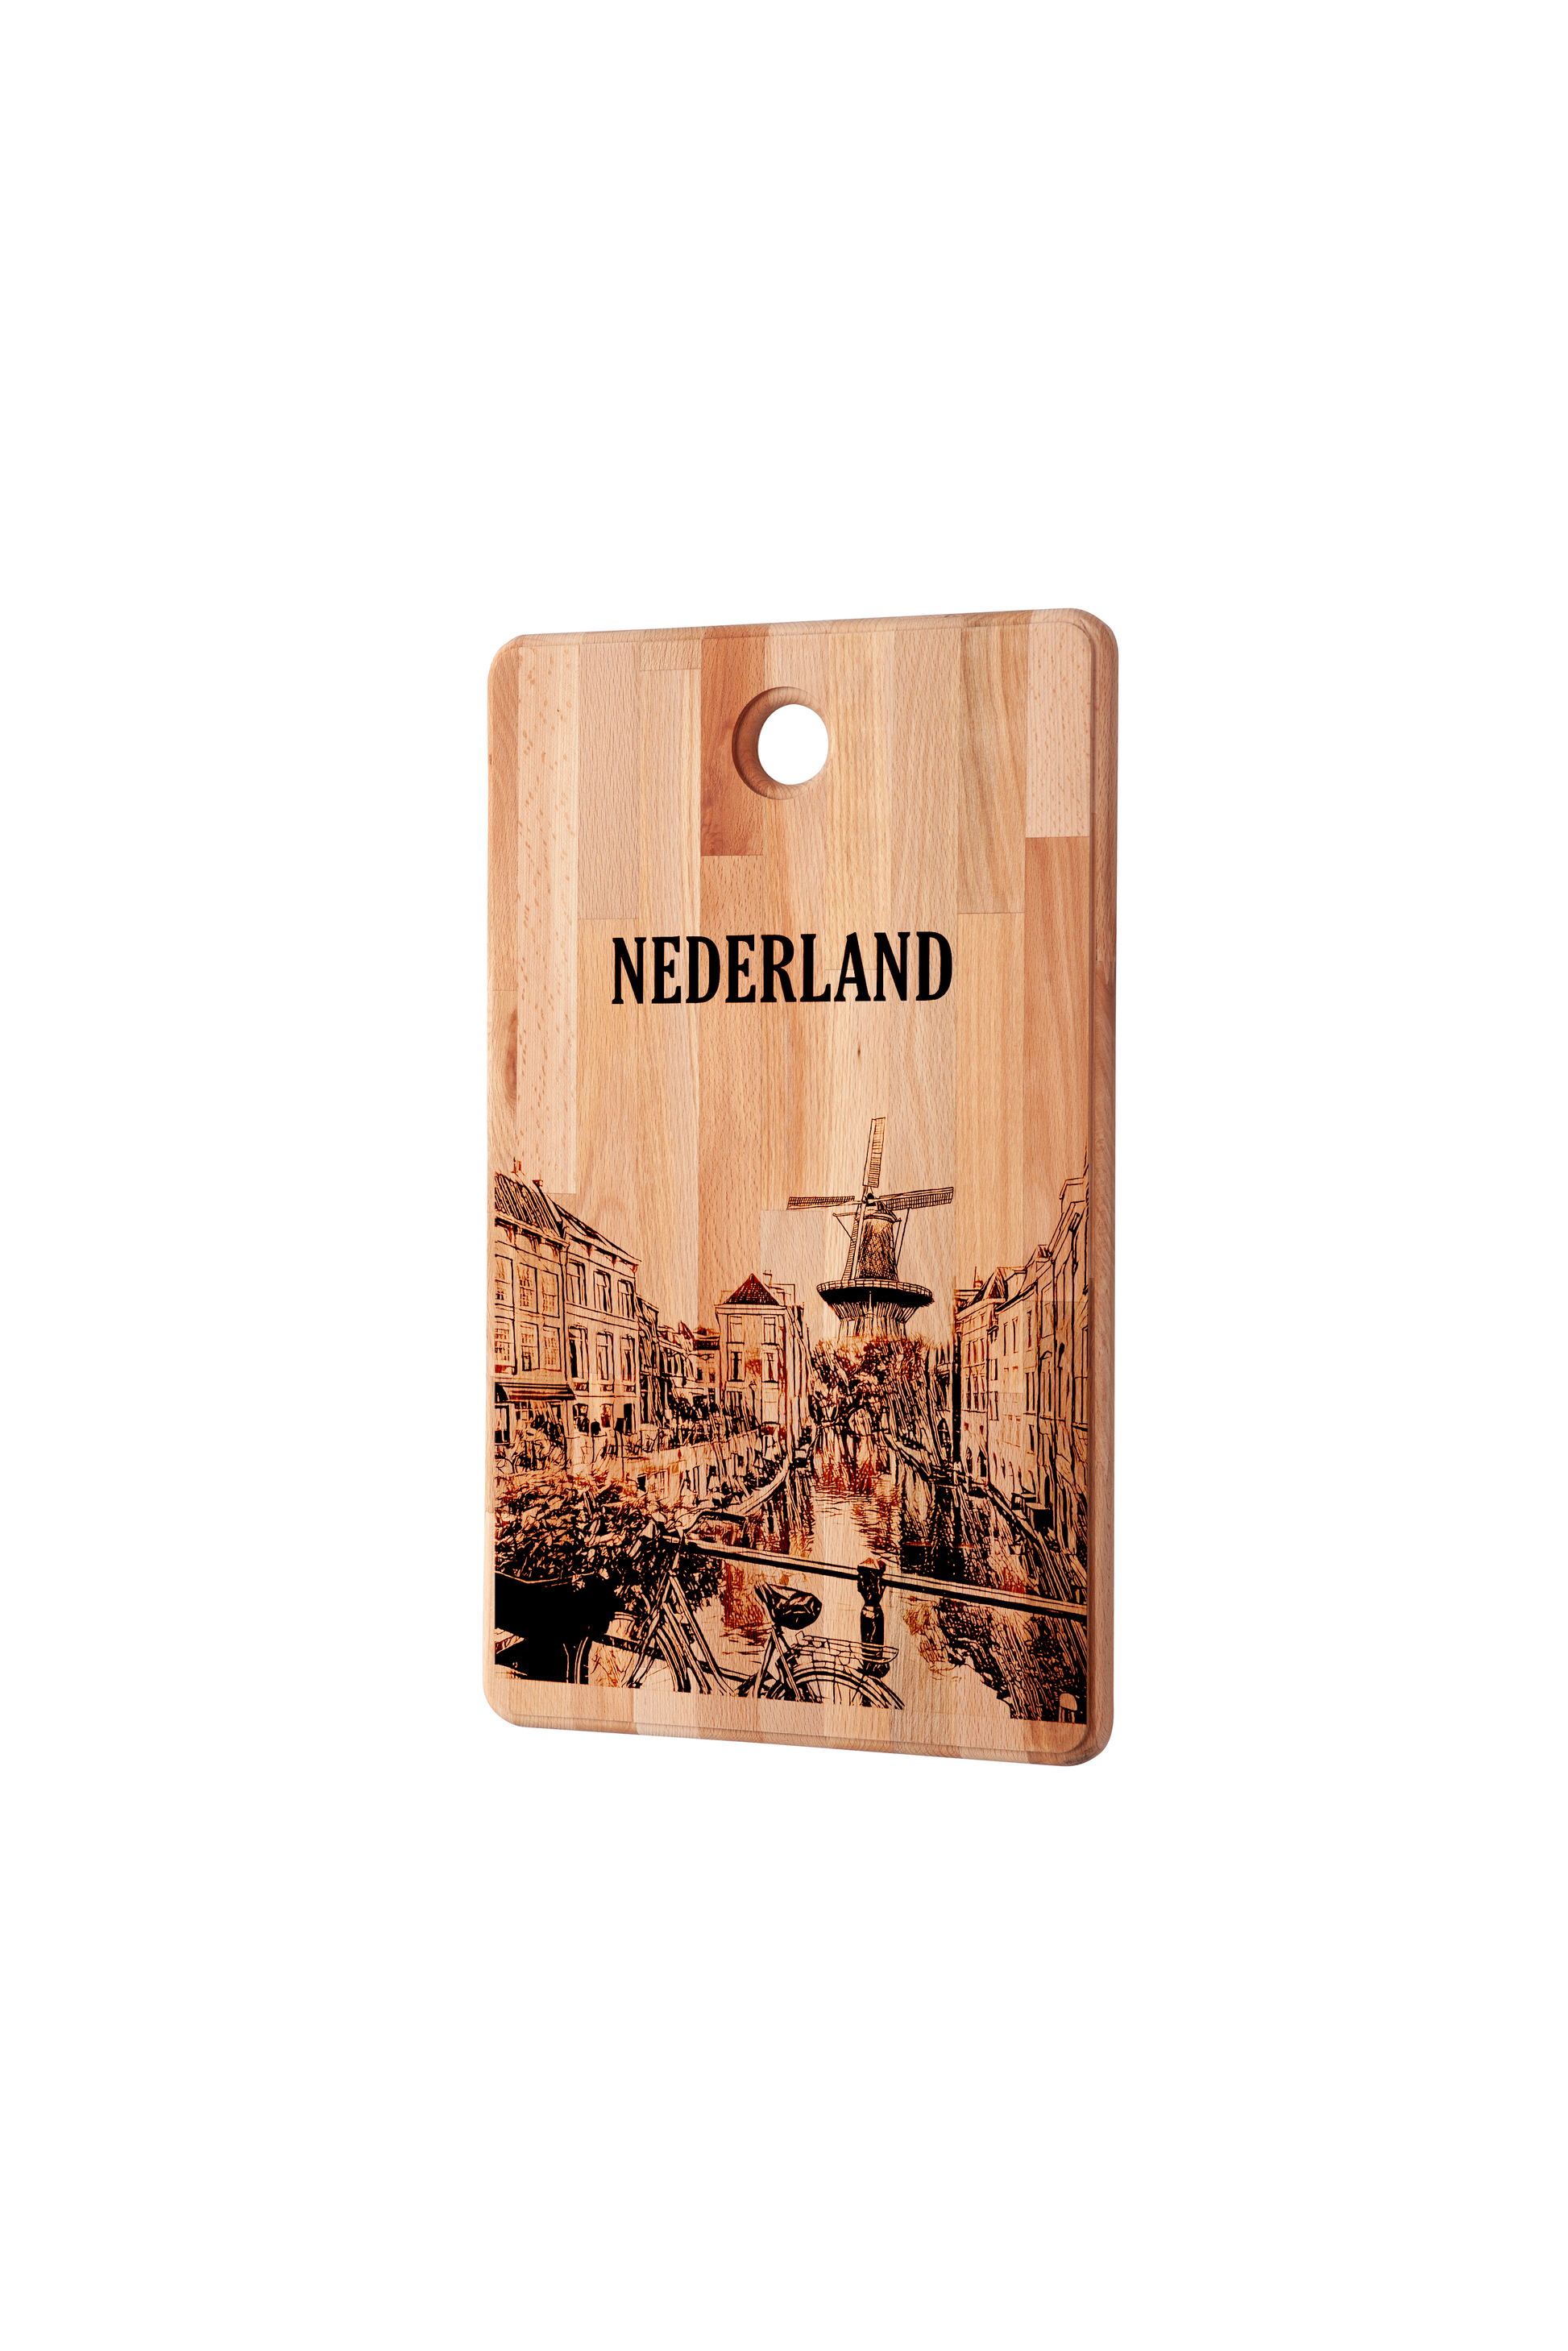 Nederland, City View, cutting board, side view